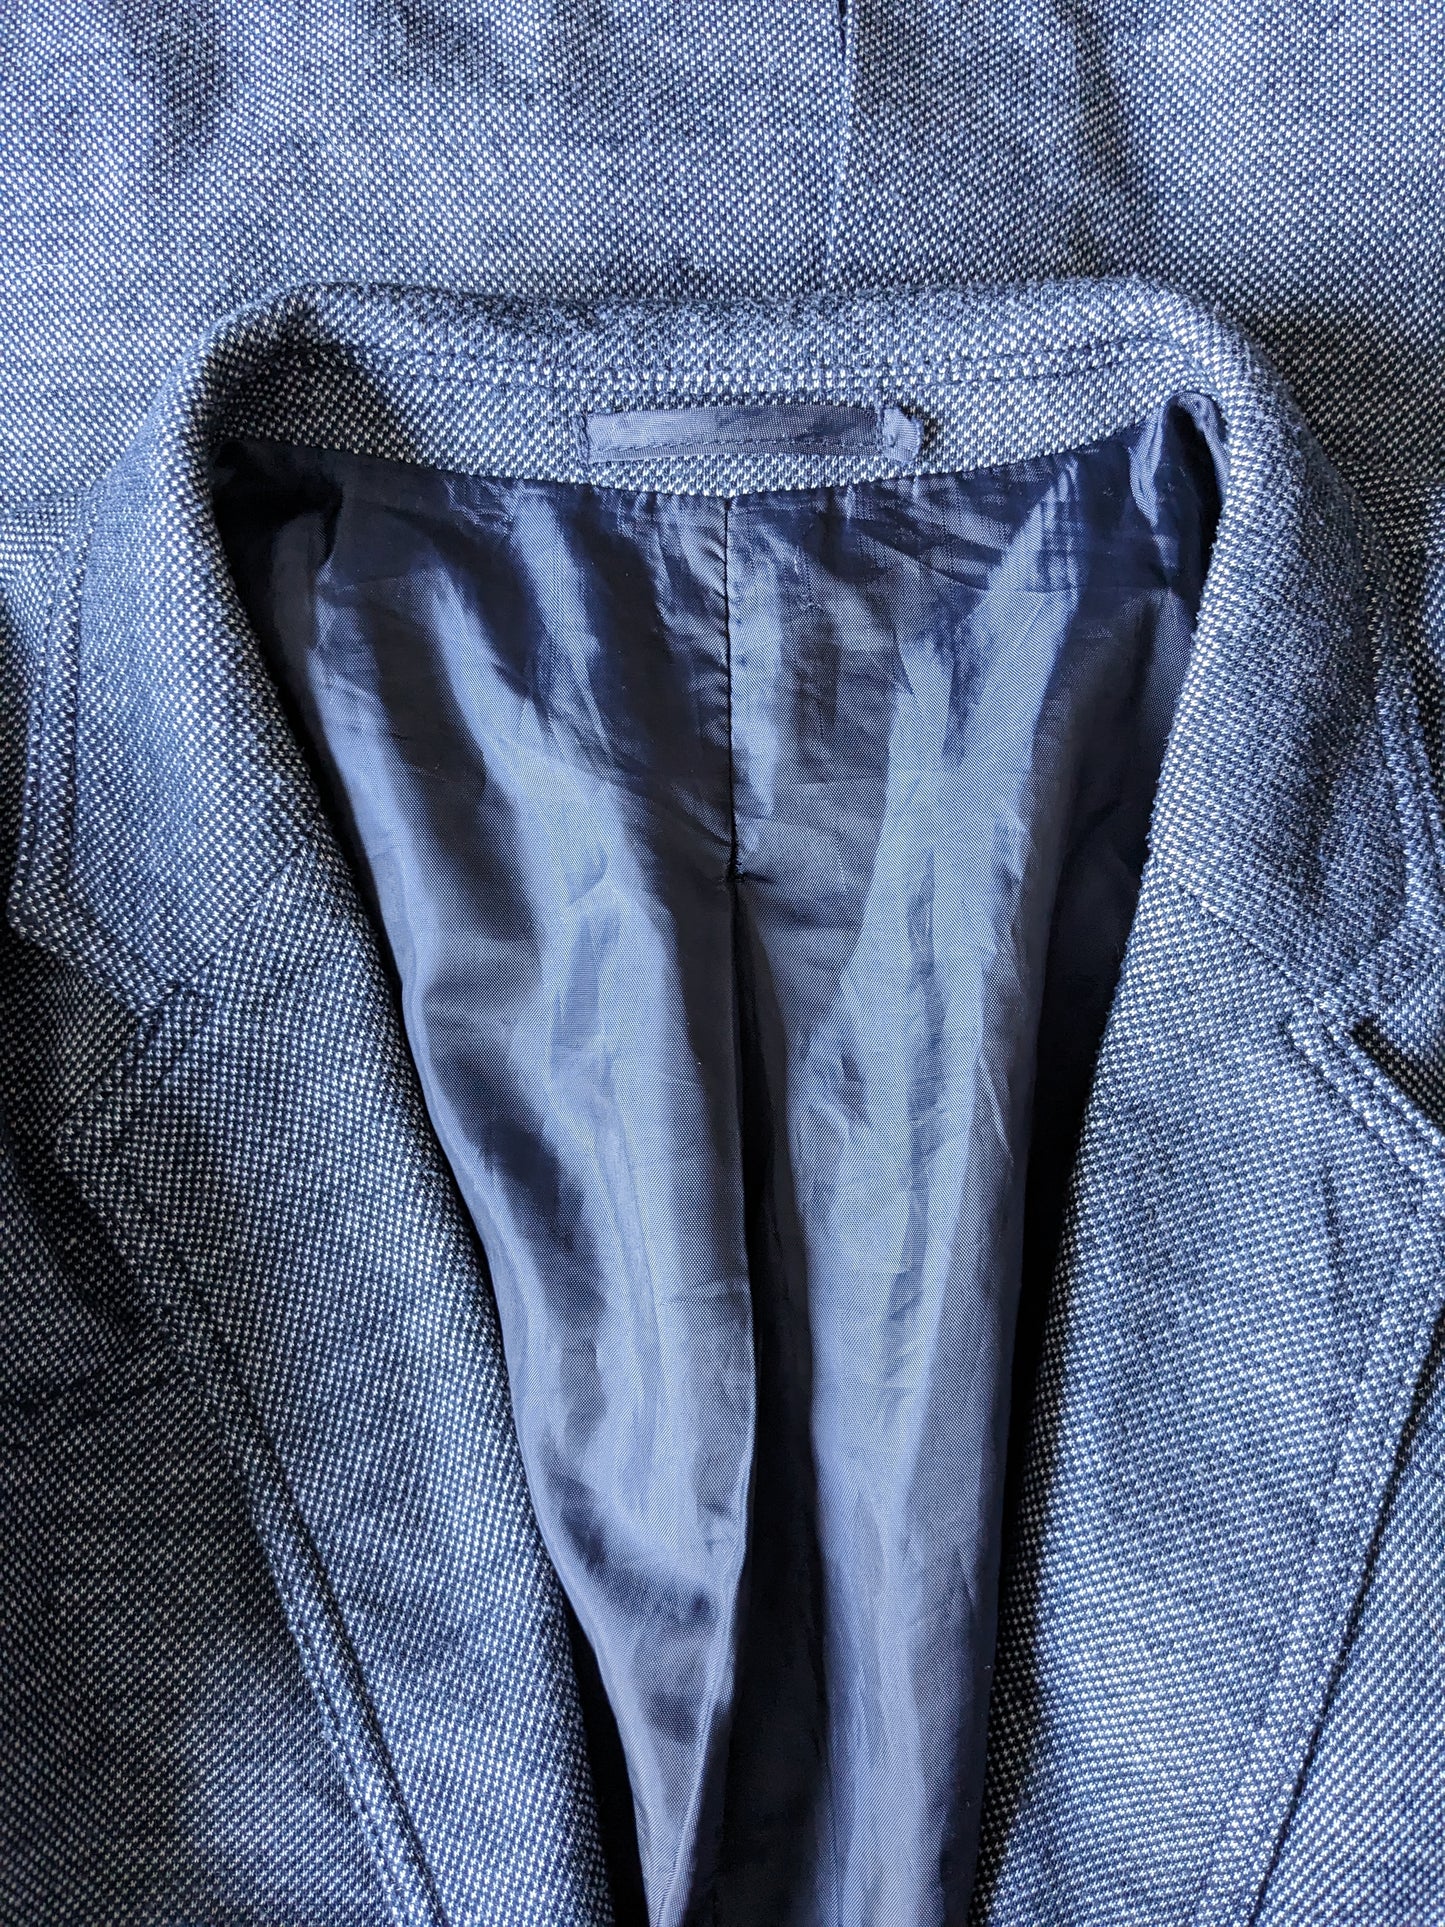 Soho Casual Colbert with elbow patches. Blue gray mixed. Size 50 / M.